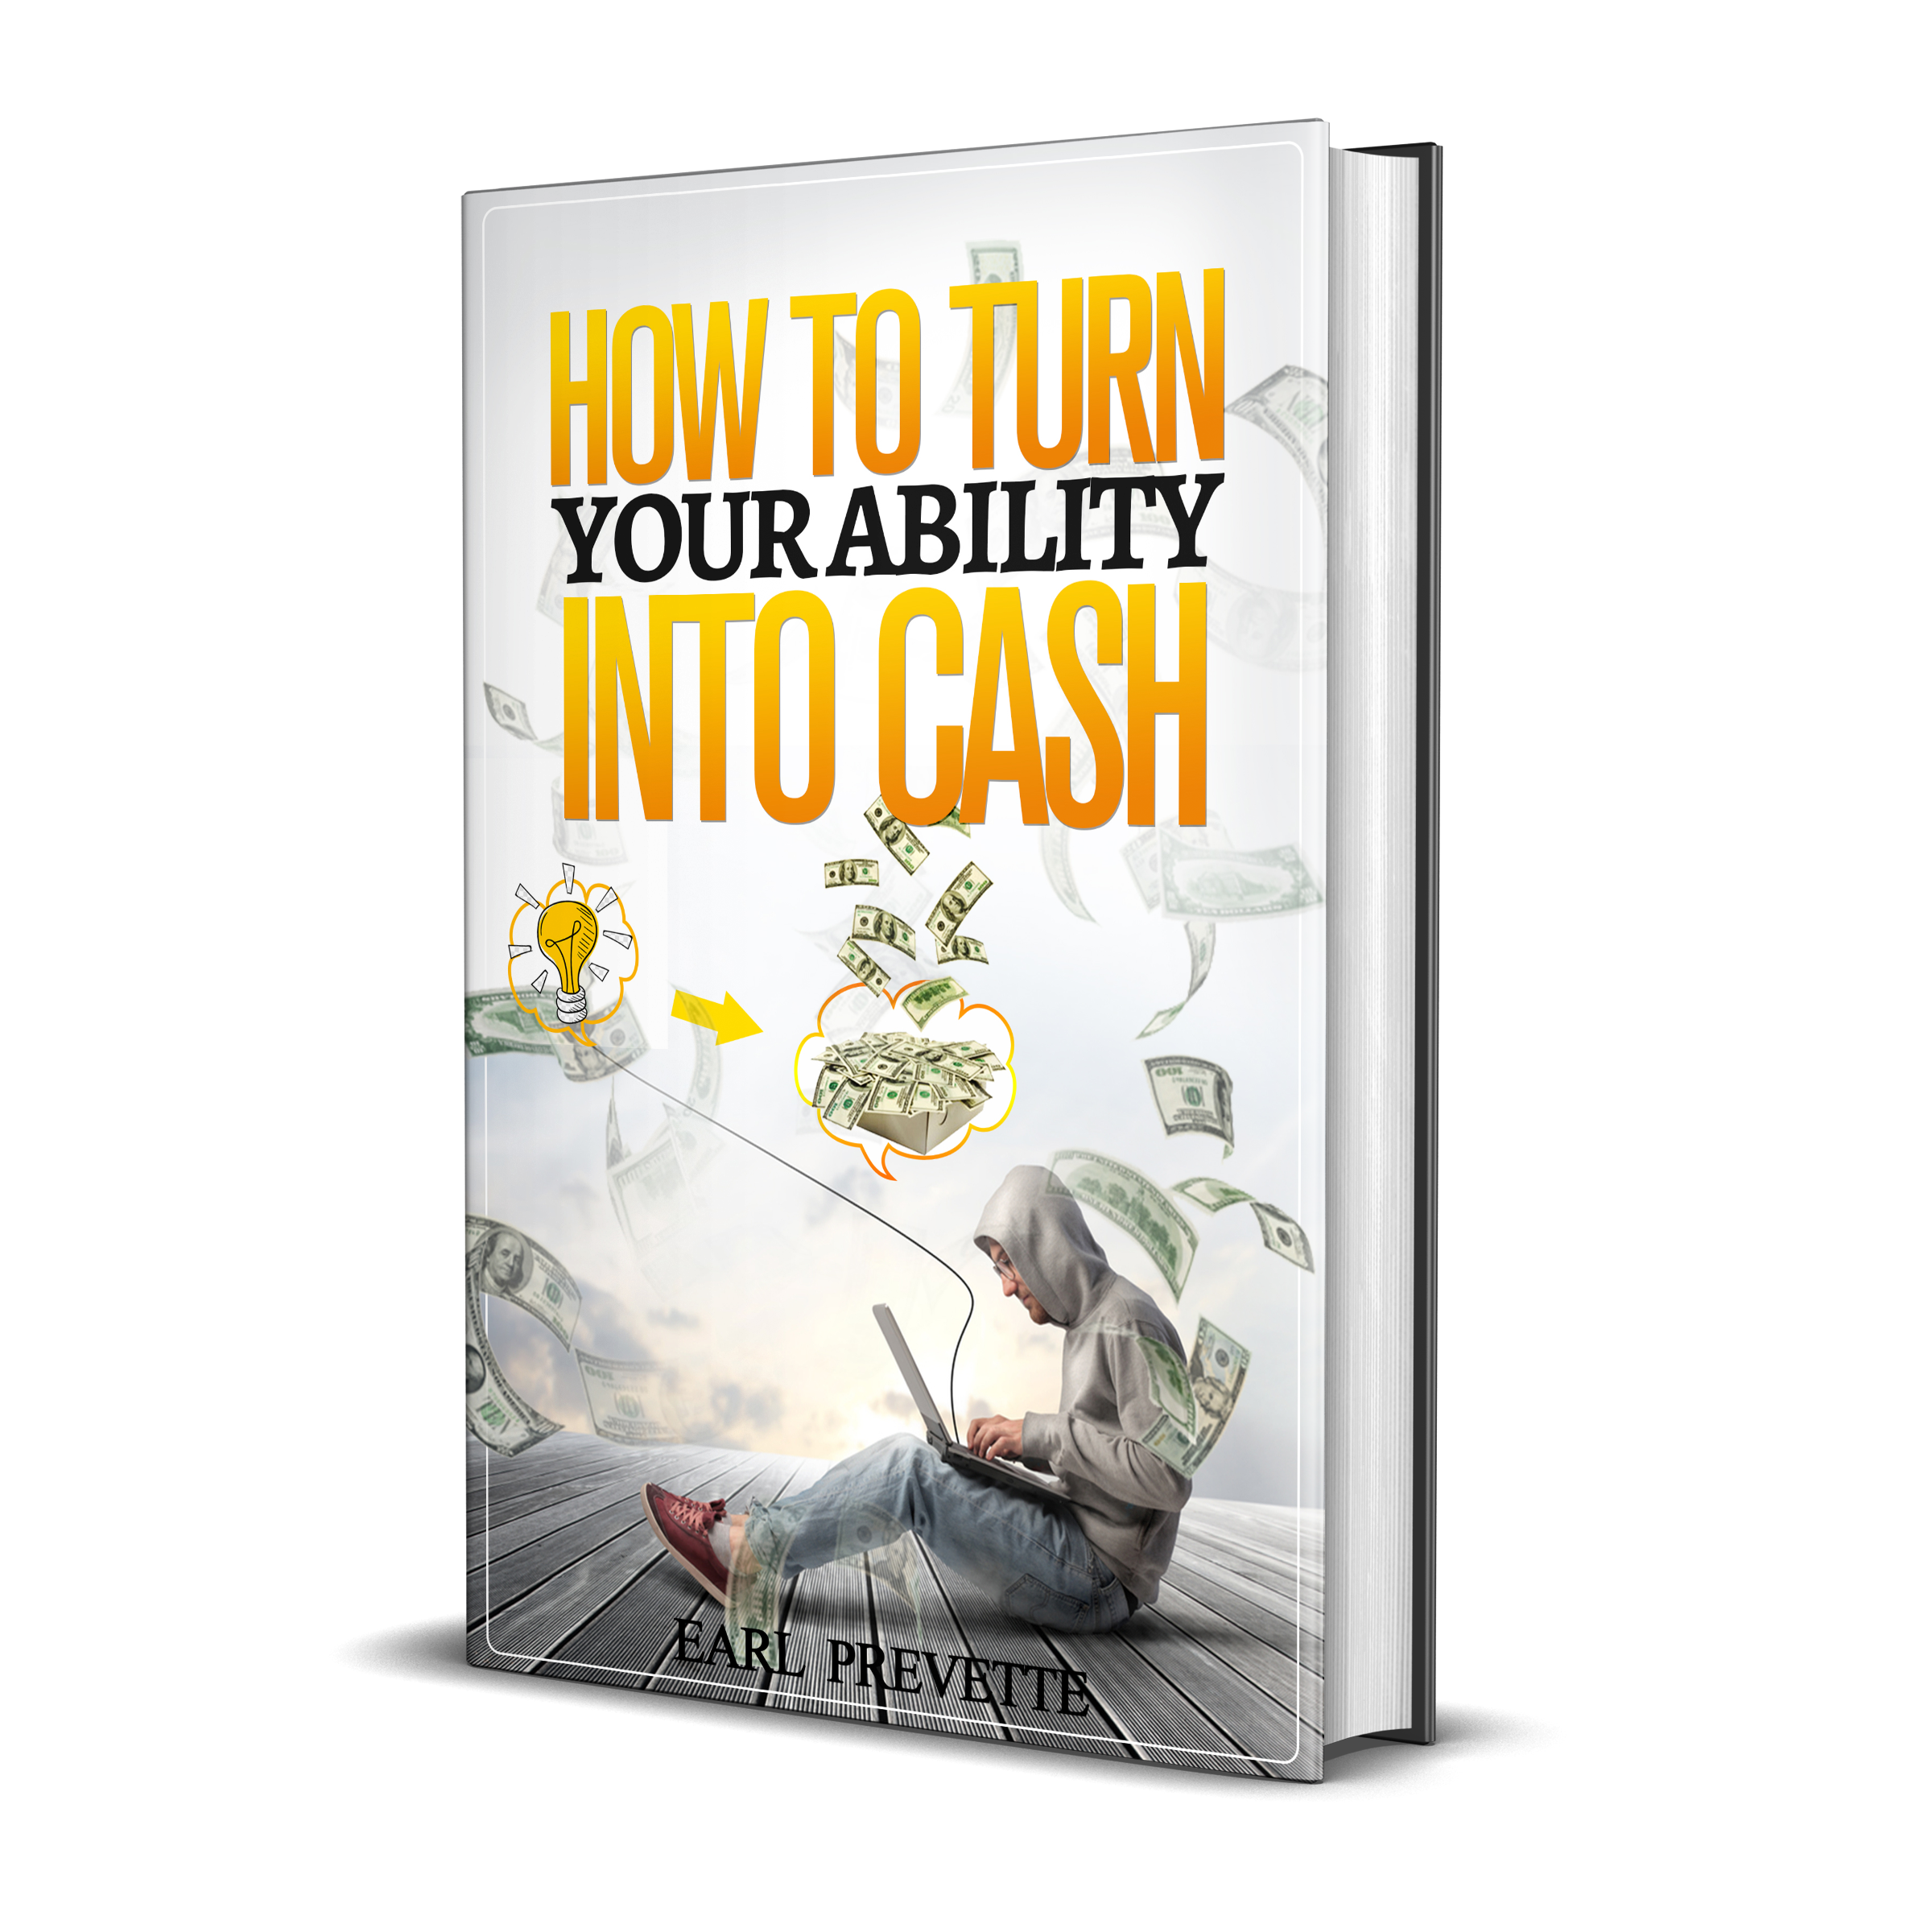 How to Turn your Ability into Cash